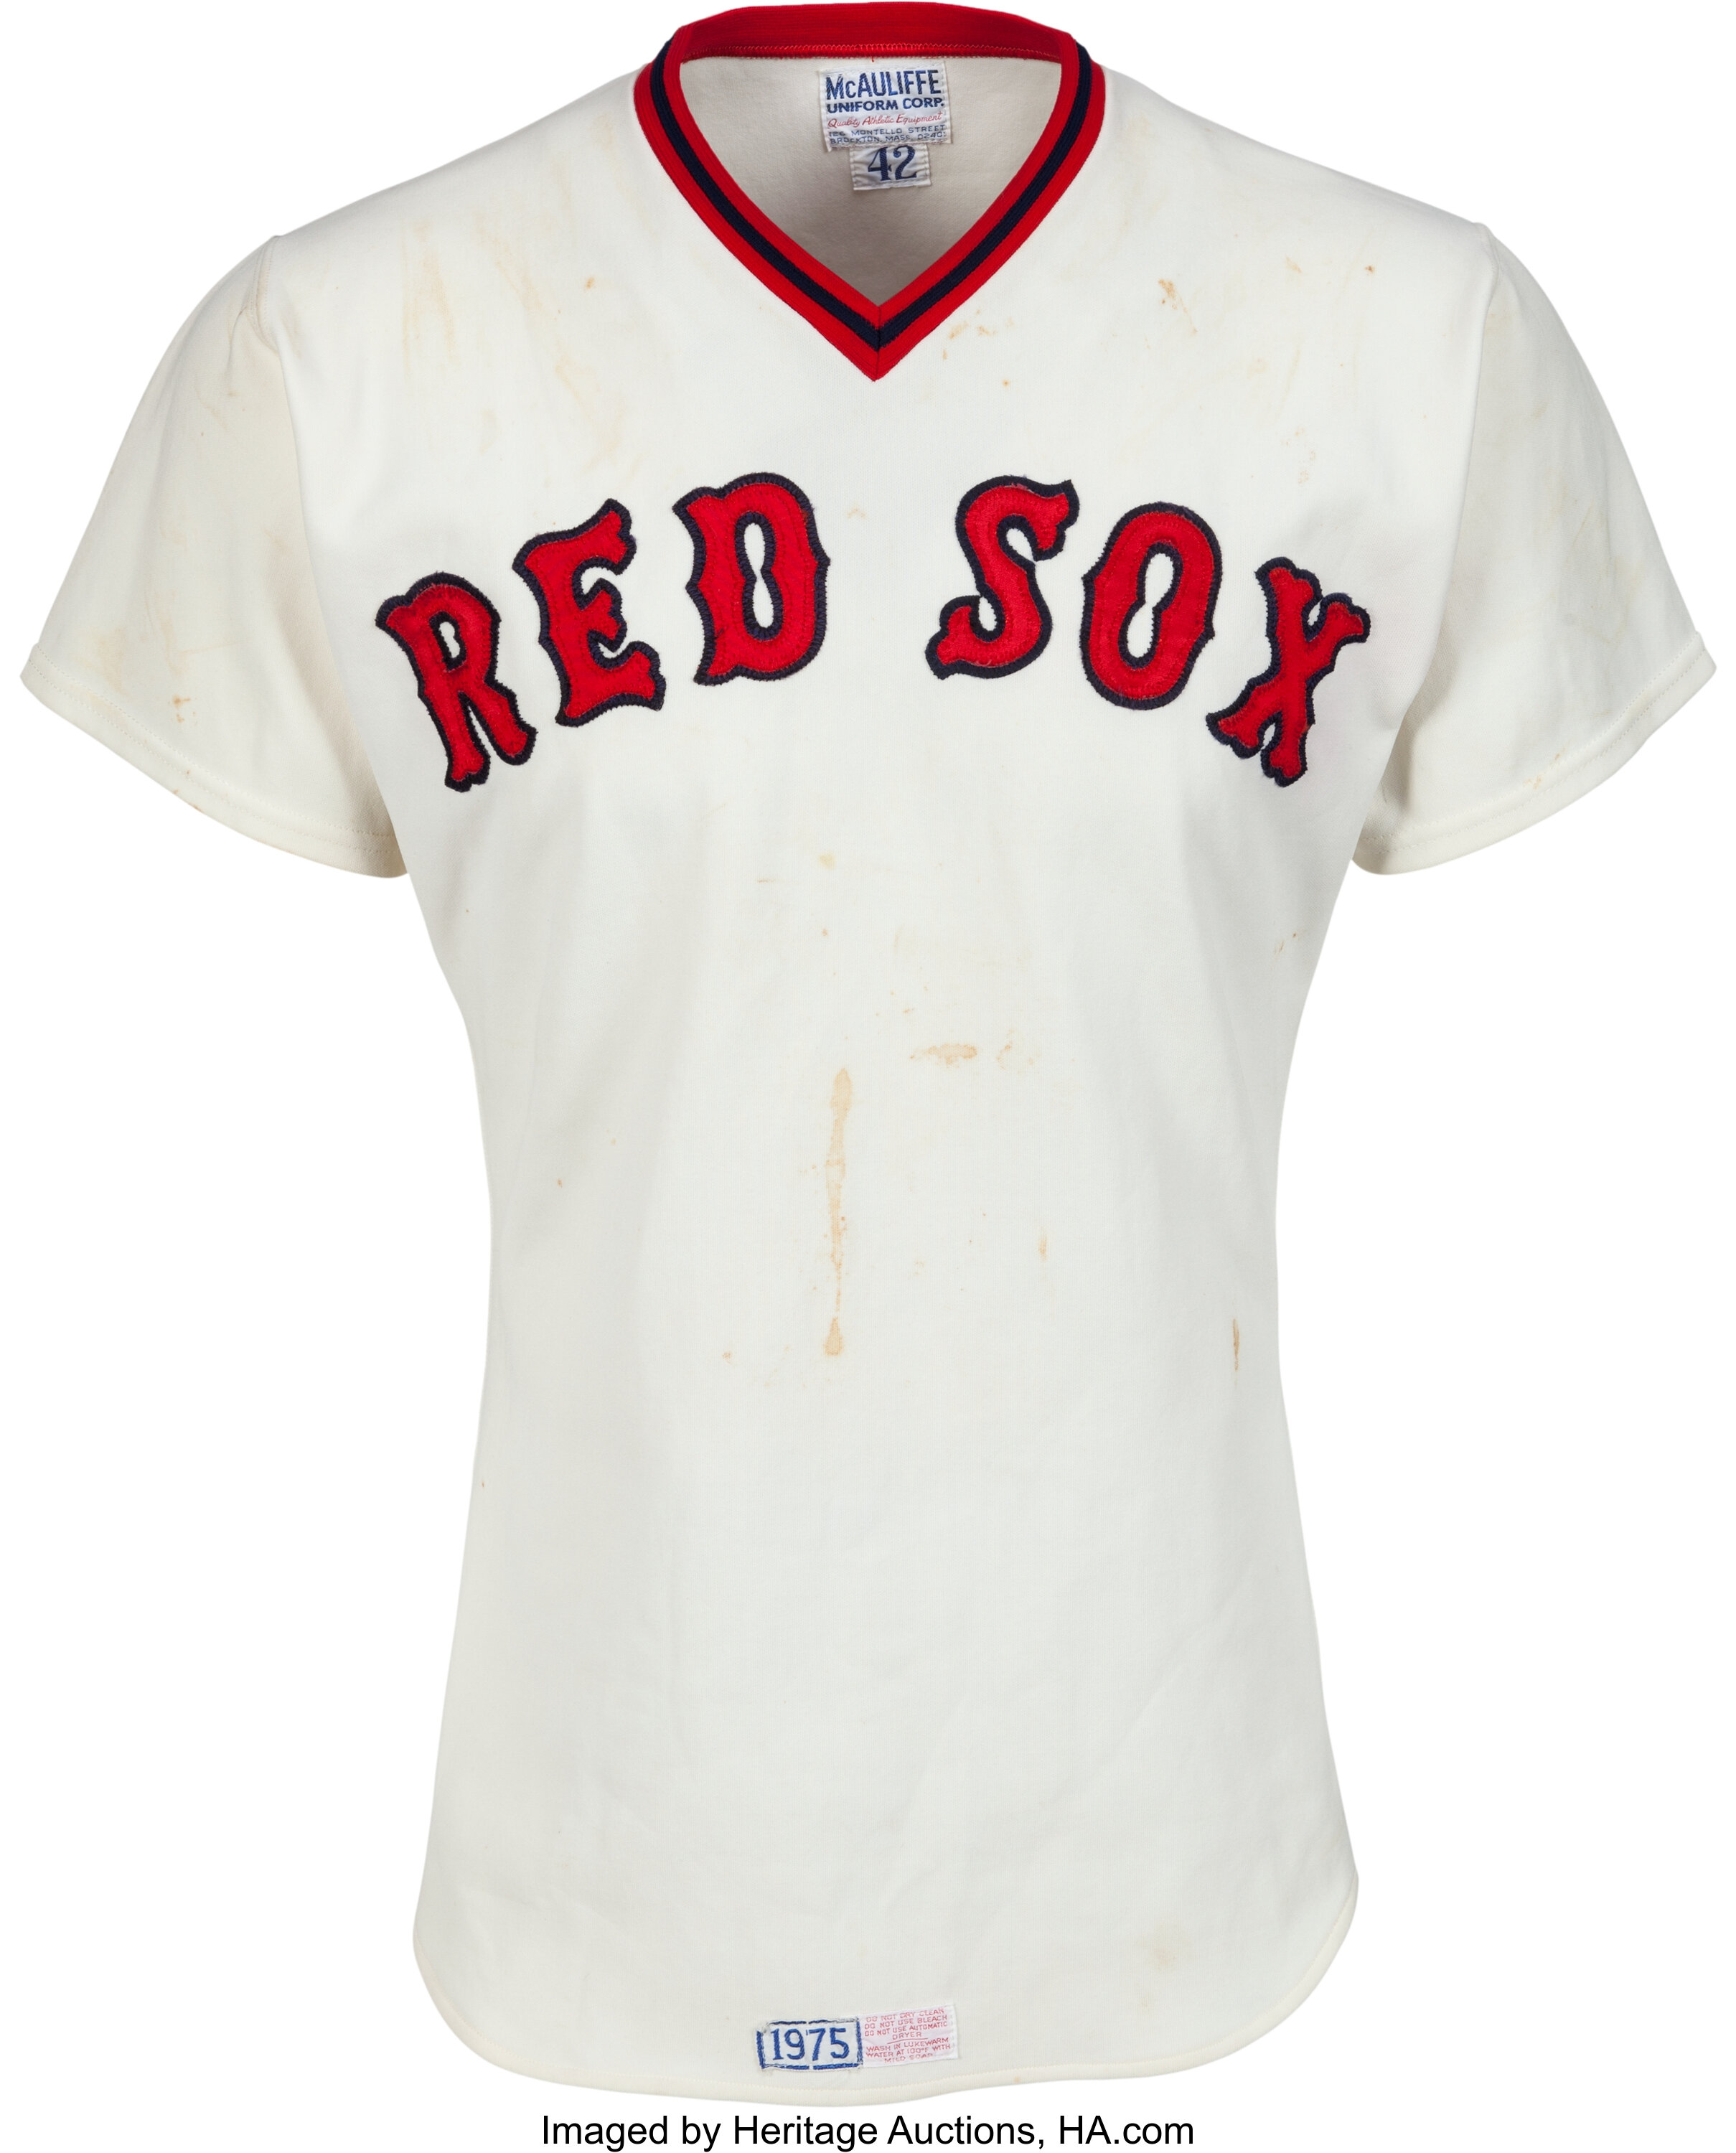 Sold at Auction: AUTHENTIC MITCHELL & NESS RED SOX 1975 TEAM